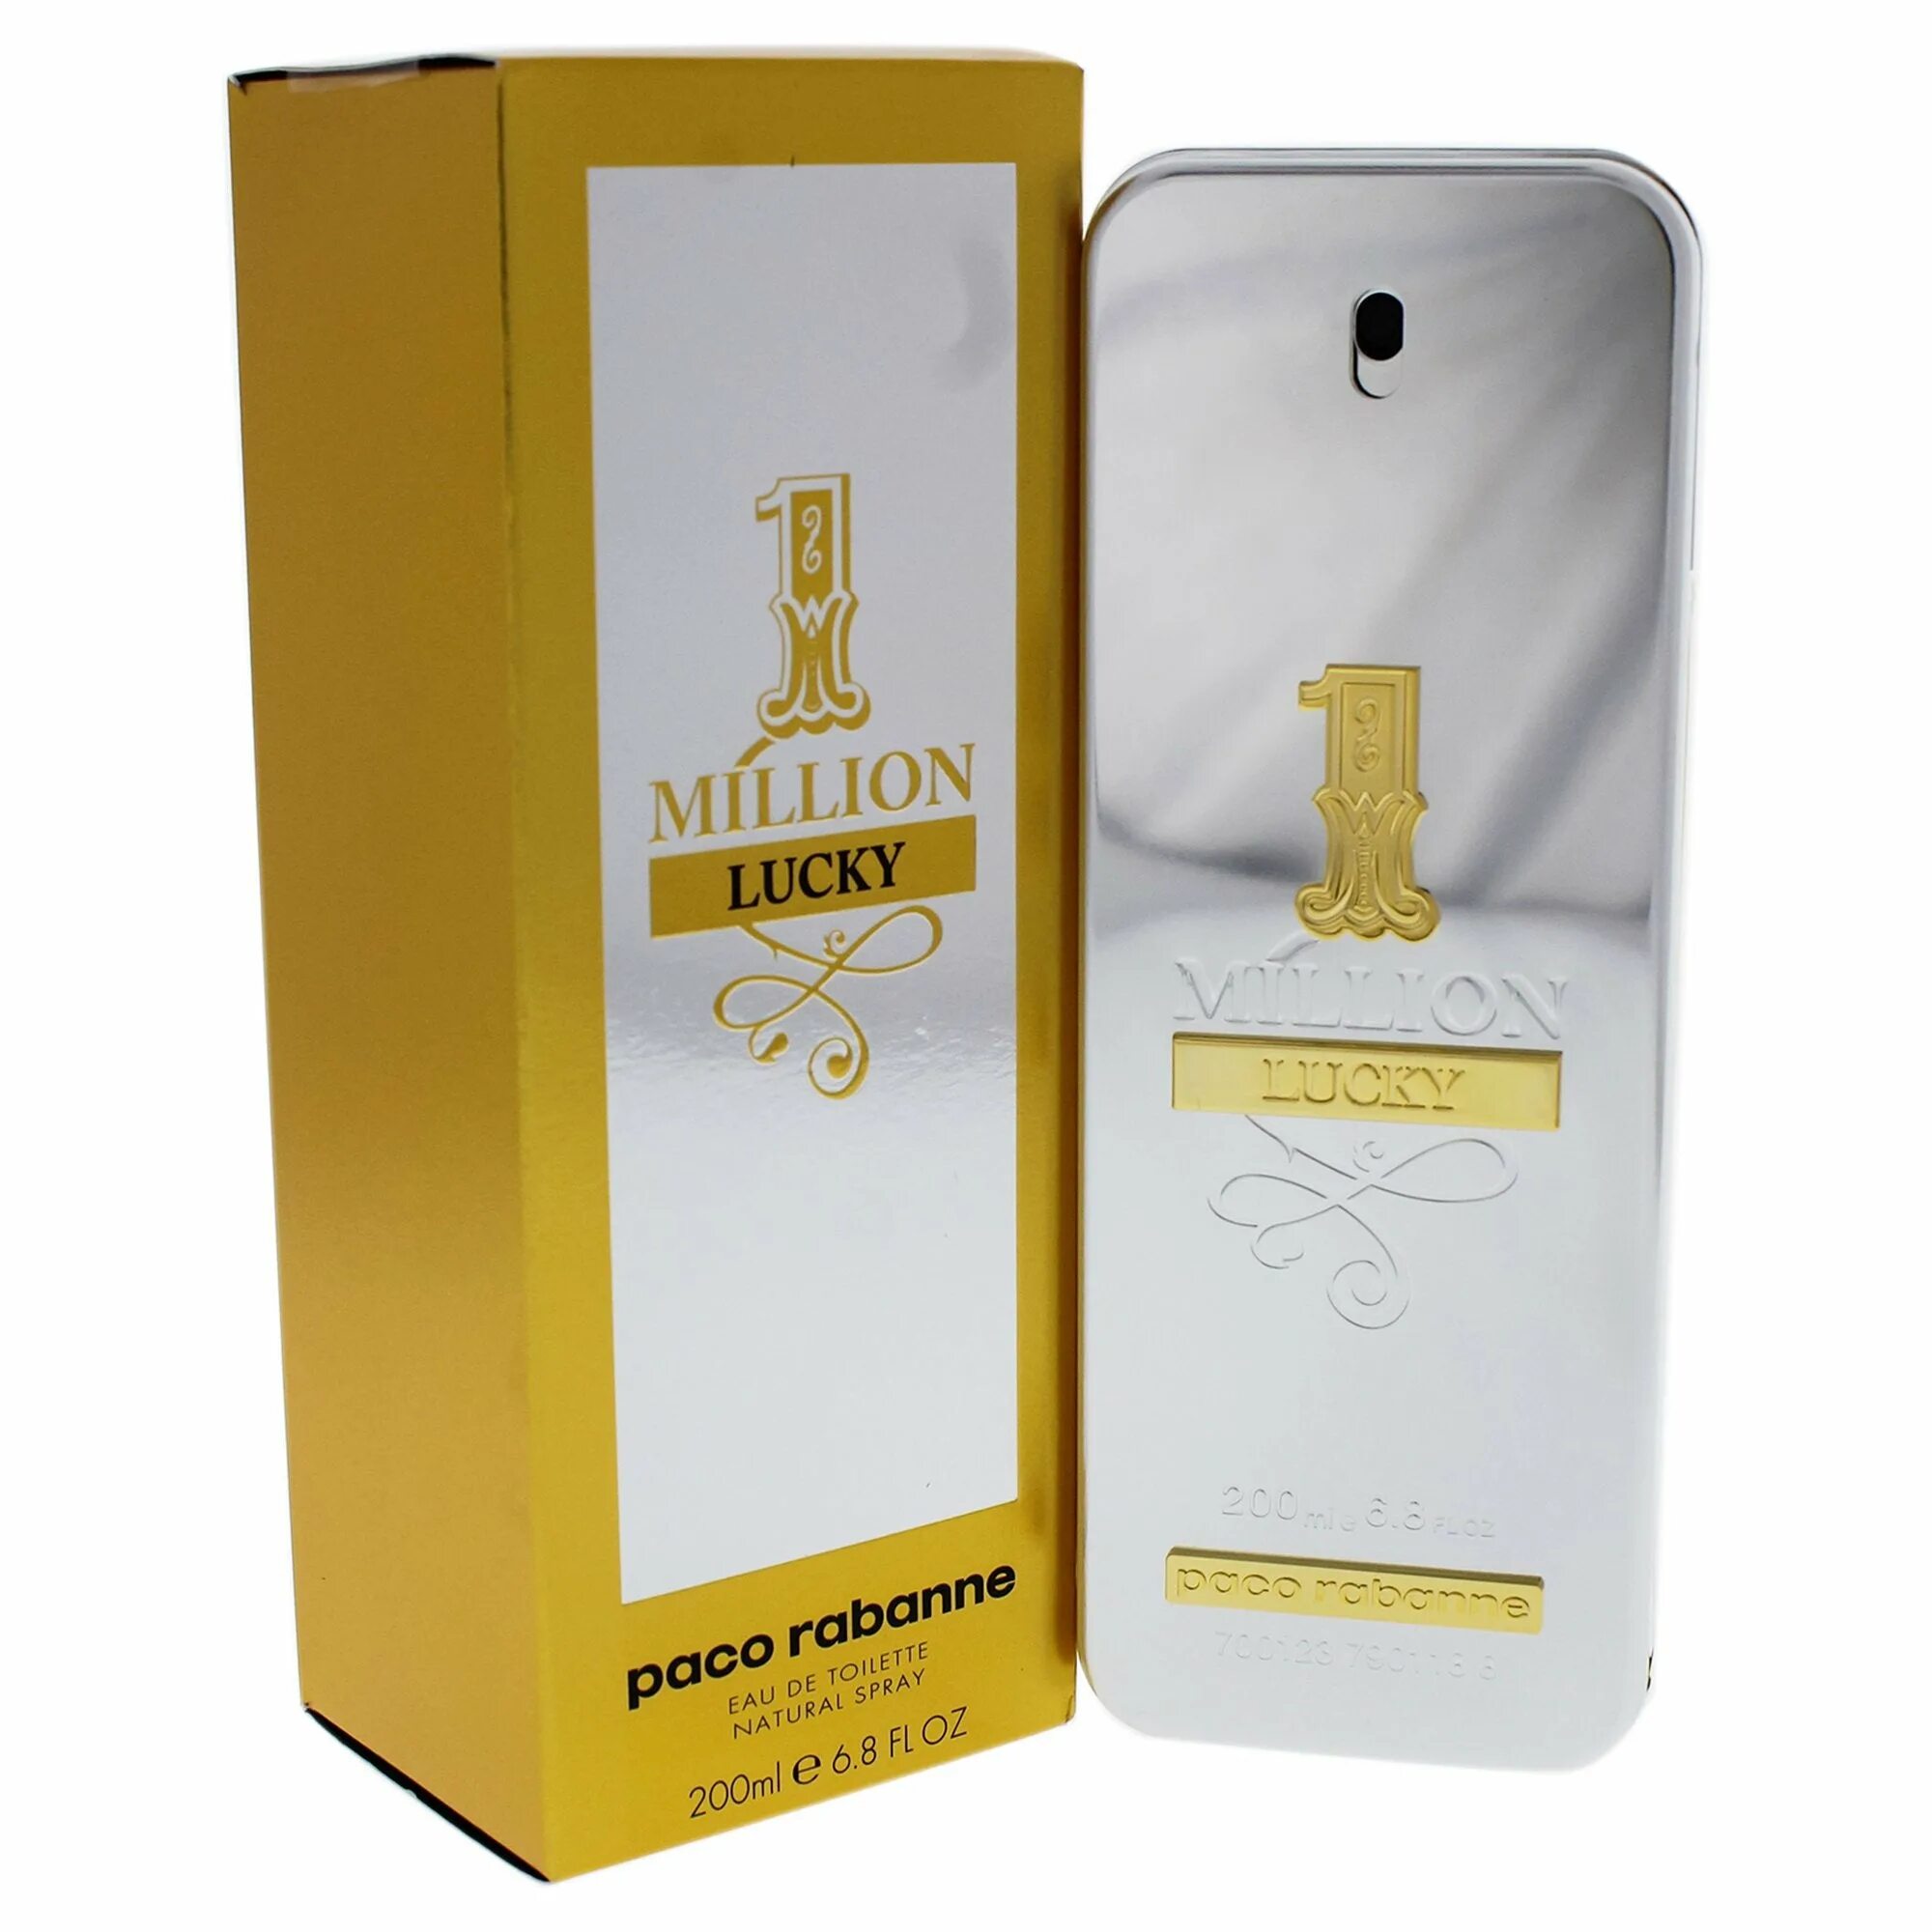 One million lucky. Paco Rabanne 1 million Lucky. One million Lucky Paco Rabanne. Paco Rabanne 1 million Lucky for men. "Масляные духи" Paco Rabanne 1 million Lucky.